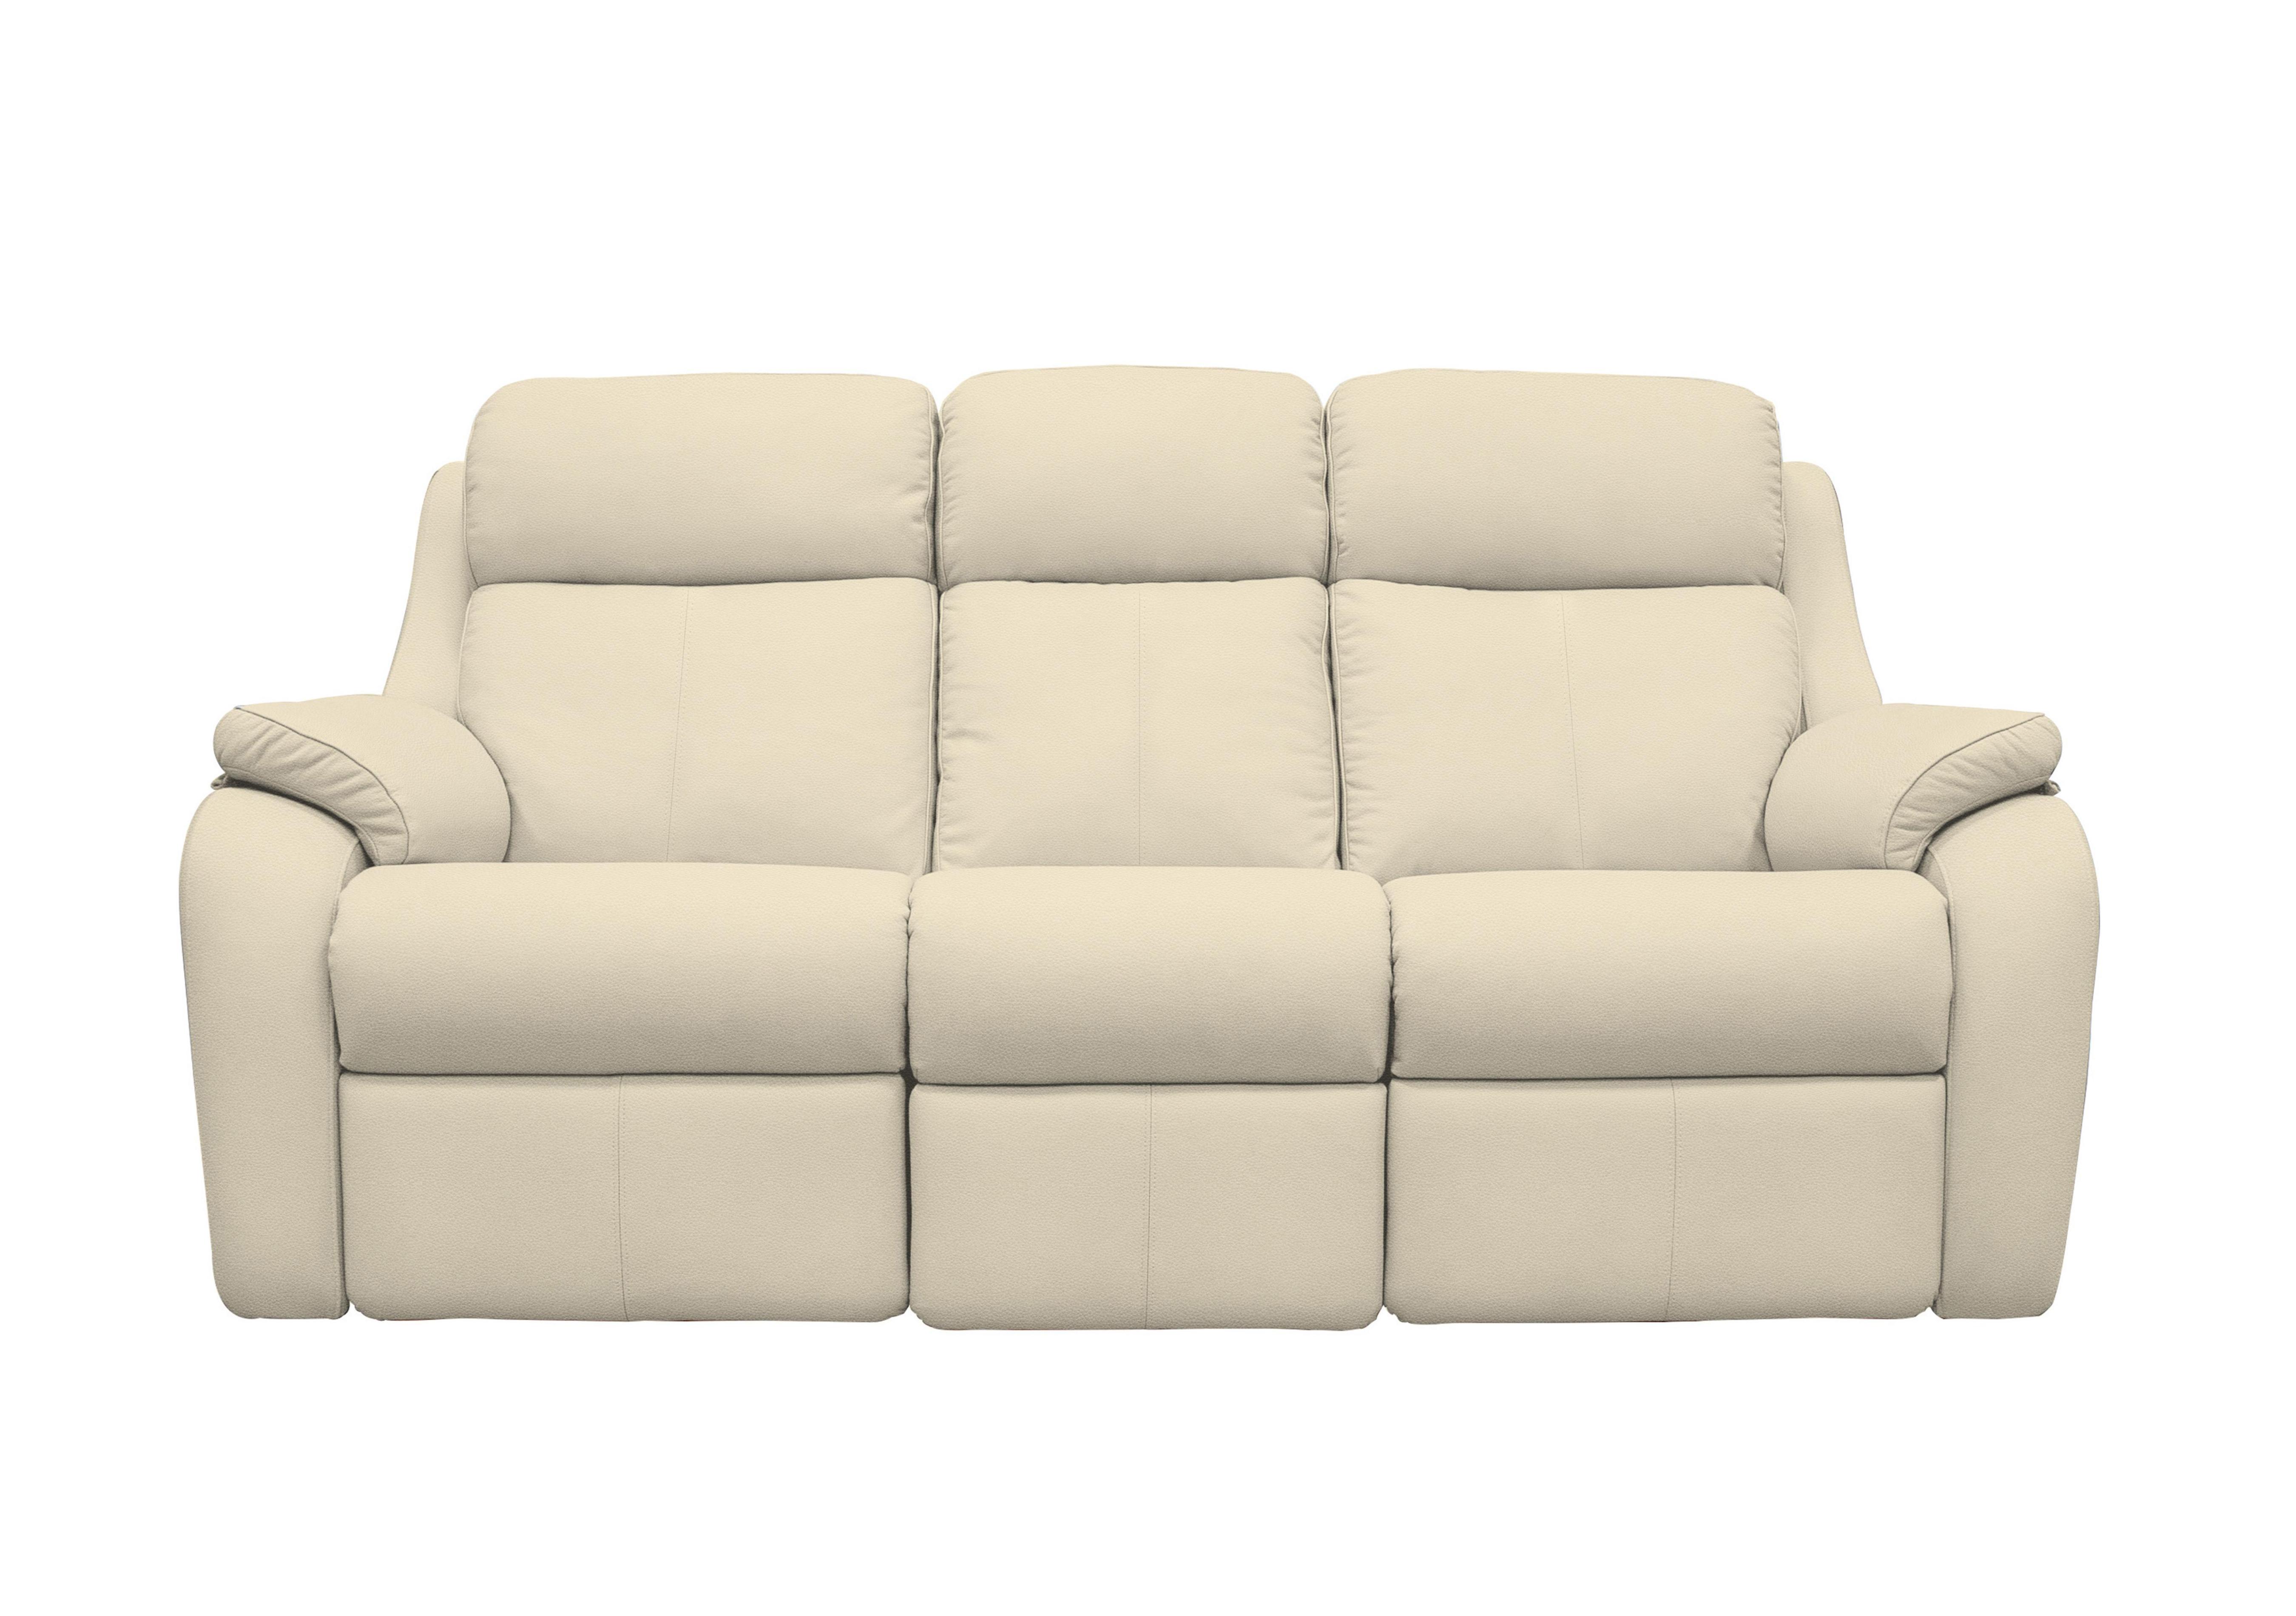 Kingsbury 3 Seater Leather Power Recliner Sofa with Power Headrests in L843 Cambridge Stone on Furniture Village